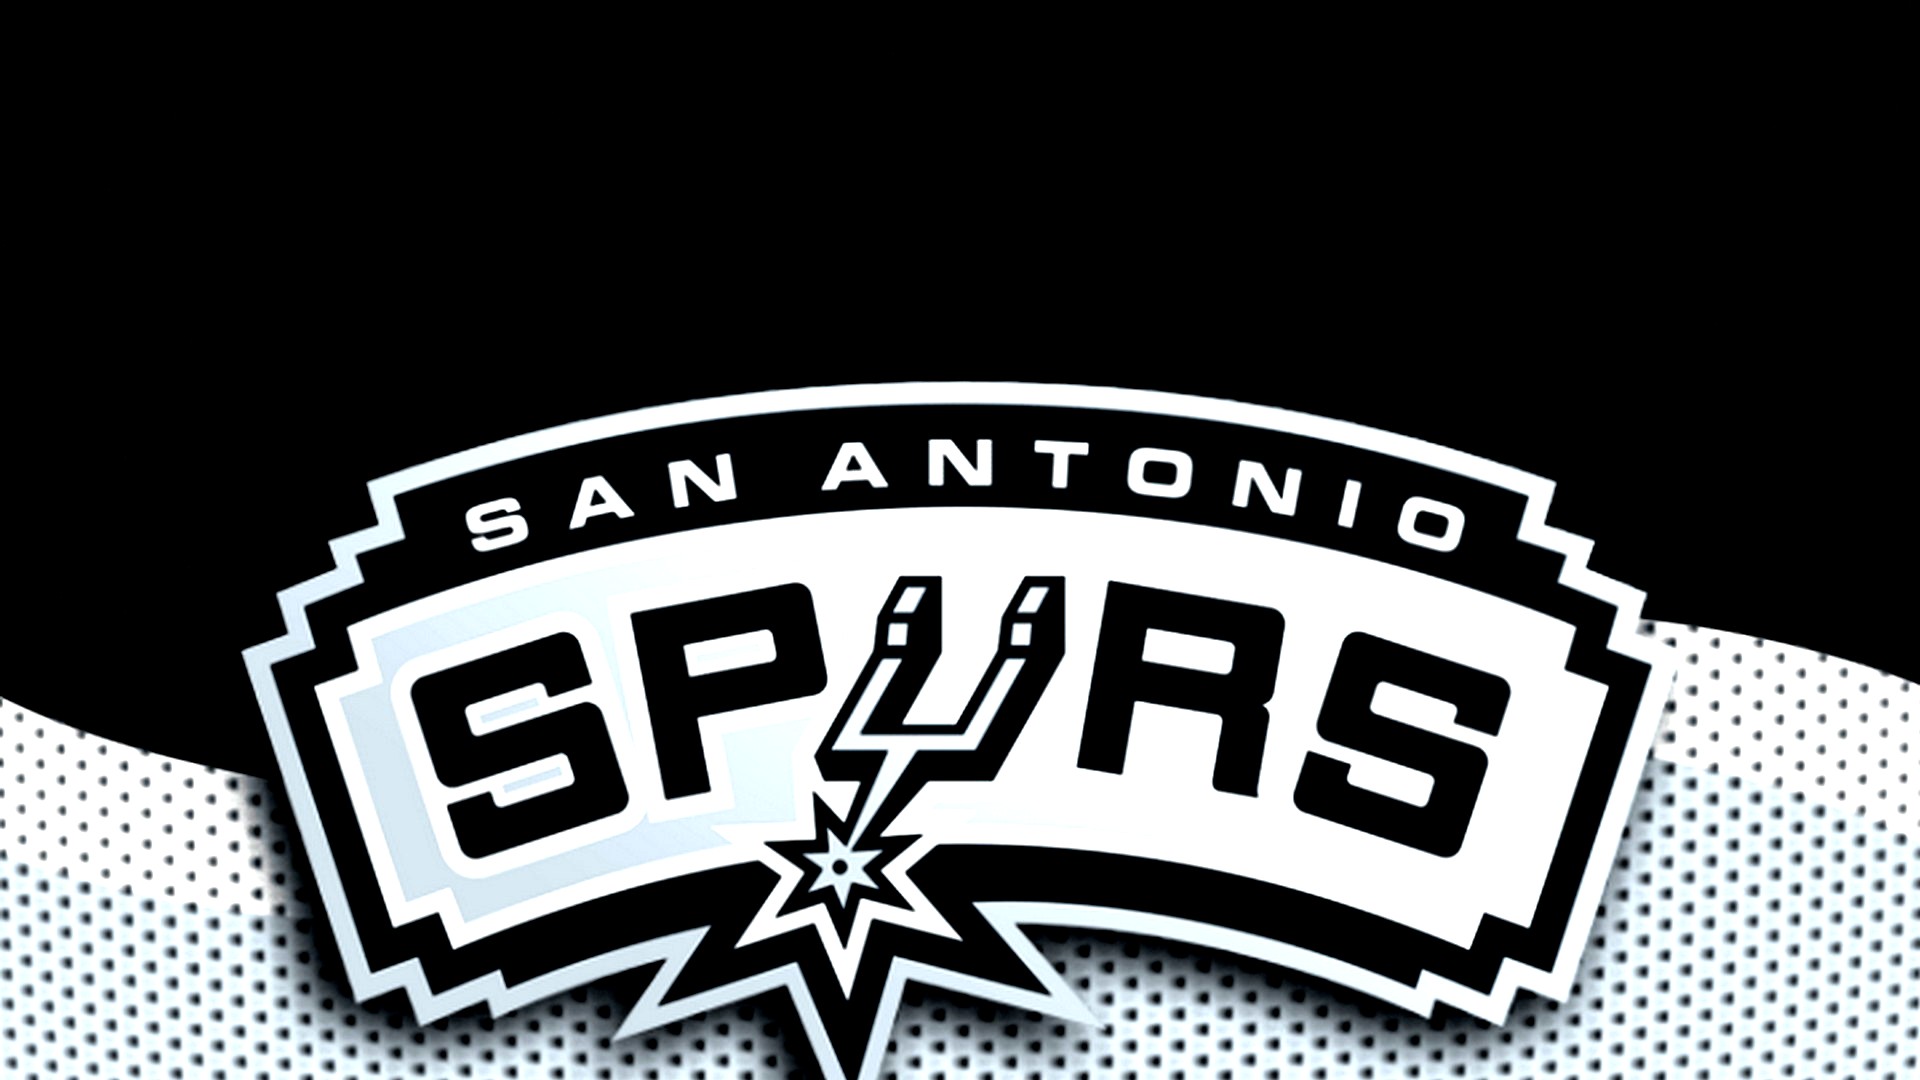 San Antonio Spurs Logo For Desktop Wallpaper with high-resolution 1920x1080 pixel. You can use this wallpaper for your Desktop Computer Backgrounds, Windows or Mac Screensavers, iPhone Lock screen, Tablet or Android and another Mobile Phone device